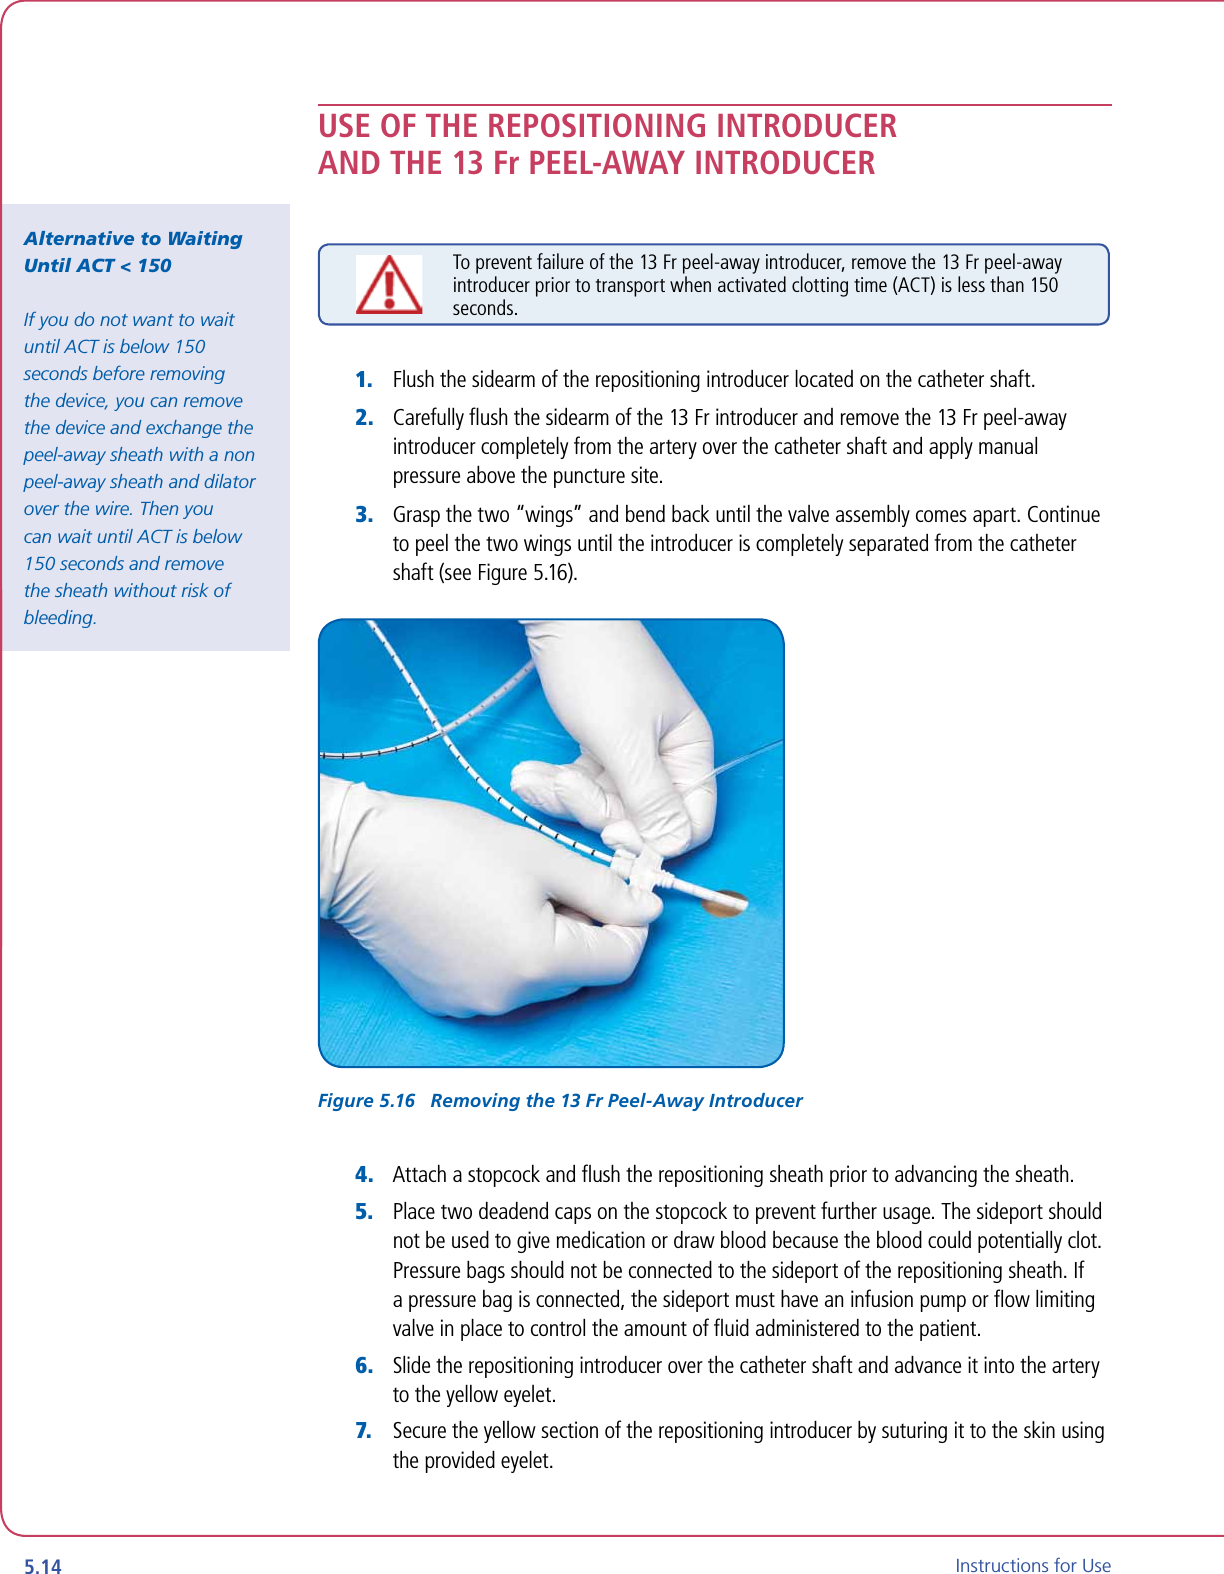 5.14 Instructions for UseUSE OF THE REPOSITIONING INTRODUCER AND THE 13 Fr PEEL-AWAY INTRODUCERTo prevent failure of the 13 Fr peel-away introducer, remove the 13 Fr peel-away introducer prior to transport when activated clotting time (ACT) is less than 150 seconds.1.   Flush the sidearm of the repositioning introducer located on the catheter shaft.2.   Carefully ﬂush the sidearm of the 13 Fr introducer and remove the 13 Fr peel-away introducer completely from the artery over the catheter shaft and apply manual pressure above the puncture site.3.   Grasp the two “wings” and bend back until the valve assembly comes apart. Continue to peel the two wings until the introducer is completely separated from the catheter shaft (see Figure 5.16).Figure 5.16   Removing the 13 Fr Peel-Away Introducer4.   Attach a stopcock and ﬂush the repositioning sheath prior to advancing the sheath.5.   Place two deadend caps on the stopcock to prevent further usage. The sideport should not be used to give medication or draw blood because the blood could potentially clot. Pressure bags should not be connected to the sideport of the repositioning sheath. If a pressure bag is connected, the sideport must have an infusion pump or ﬂow limiting valve in place to control the amount of ﬂuid administered to the patient.6.   Slide the repositioning introducer over the catheter shaft and advance it into the artery to the yellow eyelet.7.   Secure the yellow section of the repositioning introducer by suturing it to the skin using the provided eyelet.Alternative to Waiting Until ACT &lt; 150If you do not want to wait until ACT is below 150 seconds before removing the device, you can remove the device and exchange the peel-away sheath with a non peel-away sheath and dilator over the wire. Then you can wait until ACT is below 150 seconds and remove the sheath without risk of bleeding.